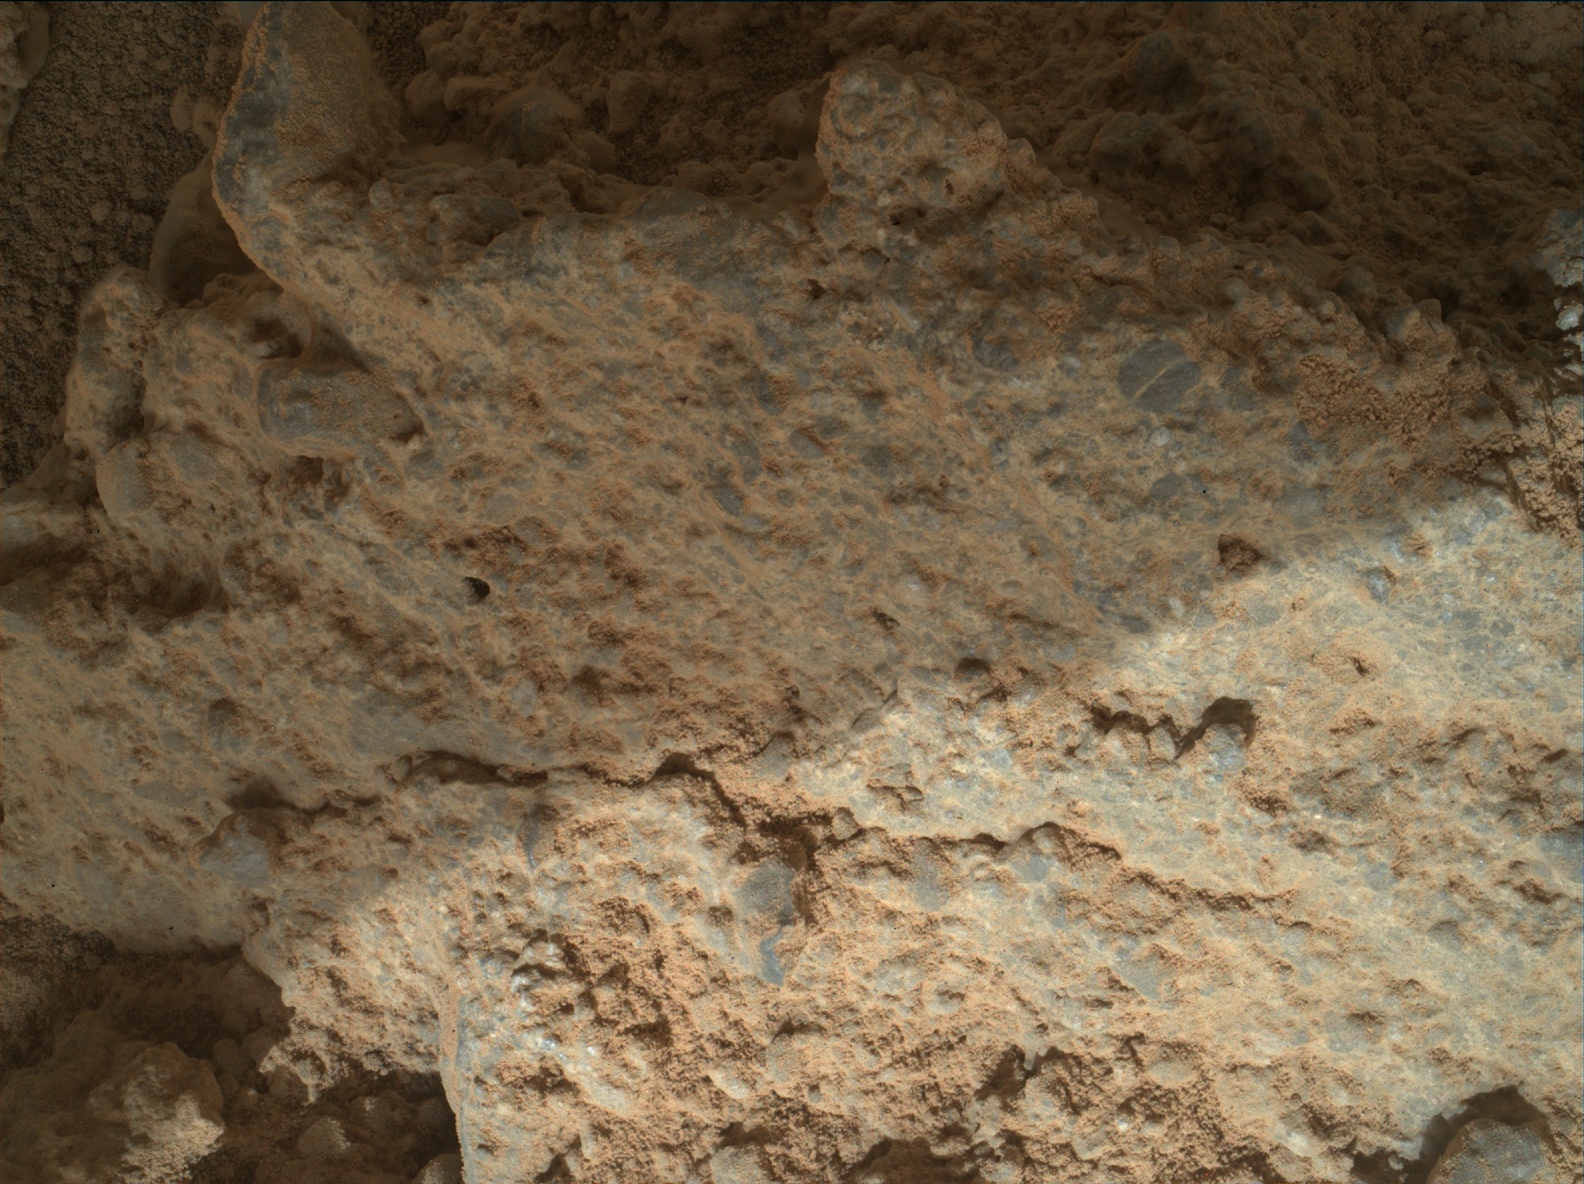 Nasa's Mars rover Curiosity acquired this image using its Mars Hand Lens Imager (MAHLI) on Sol 403